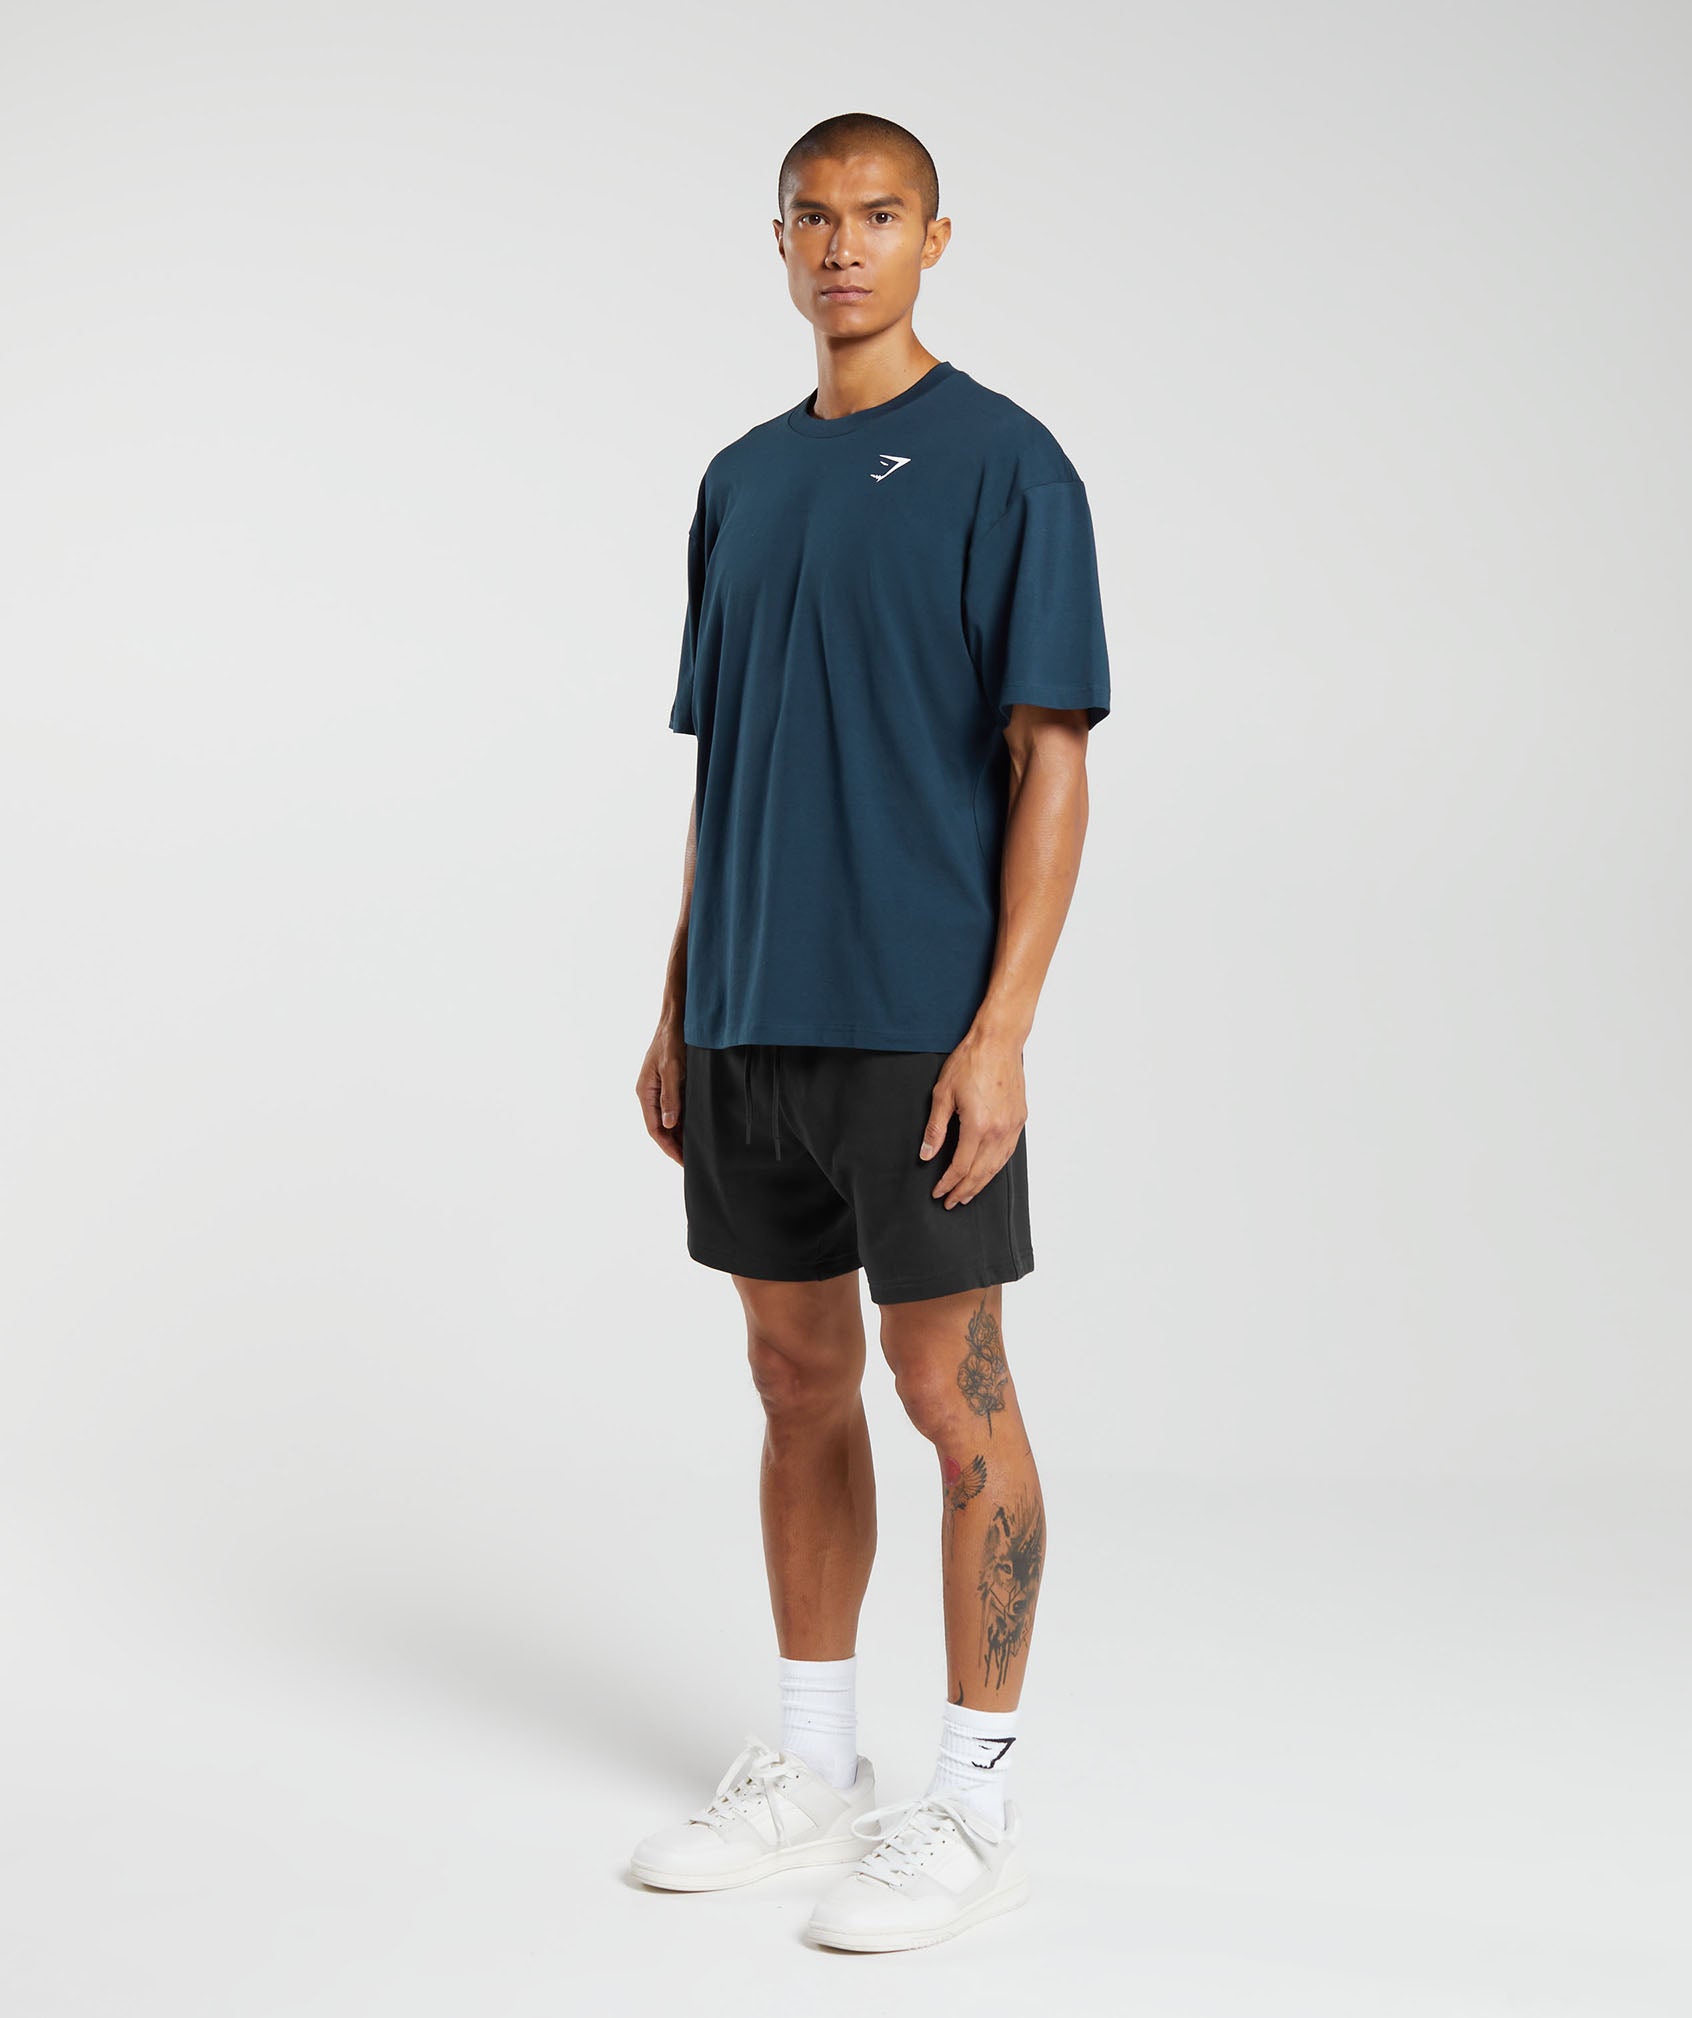 Essential Oversized T-Shirt in Navy